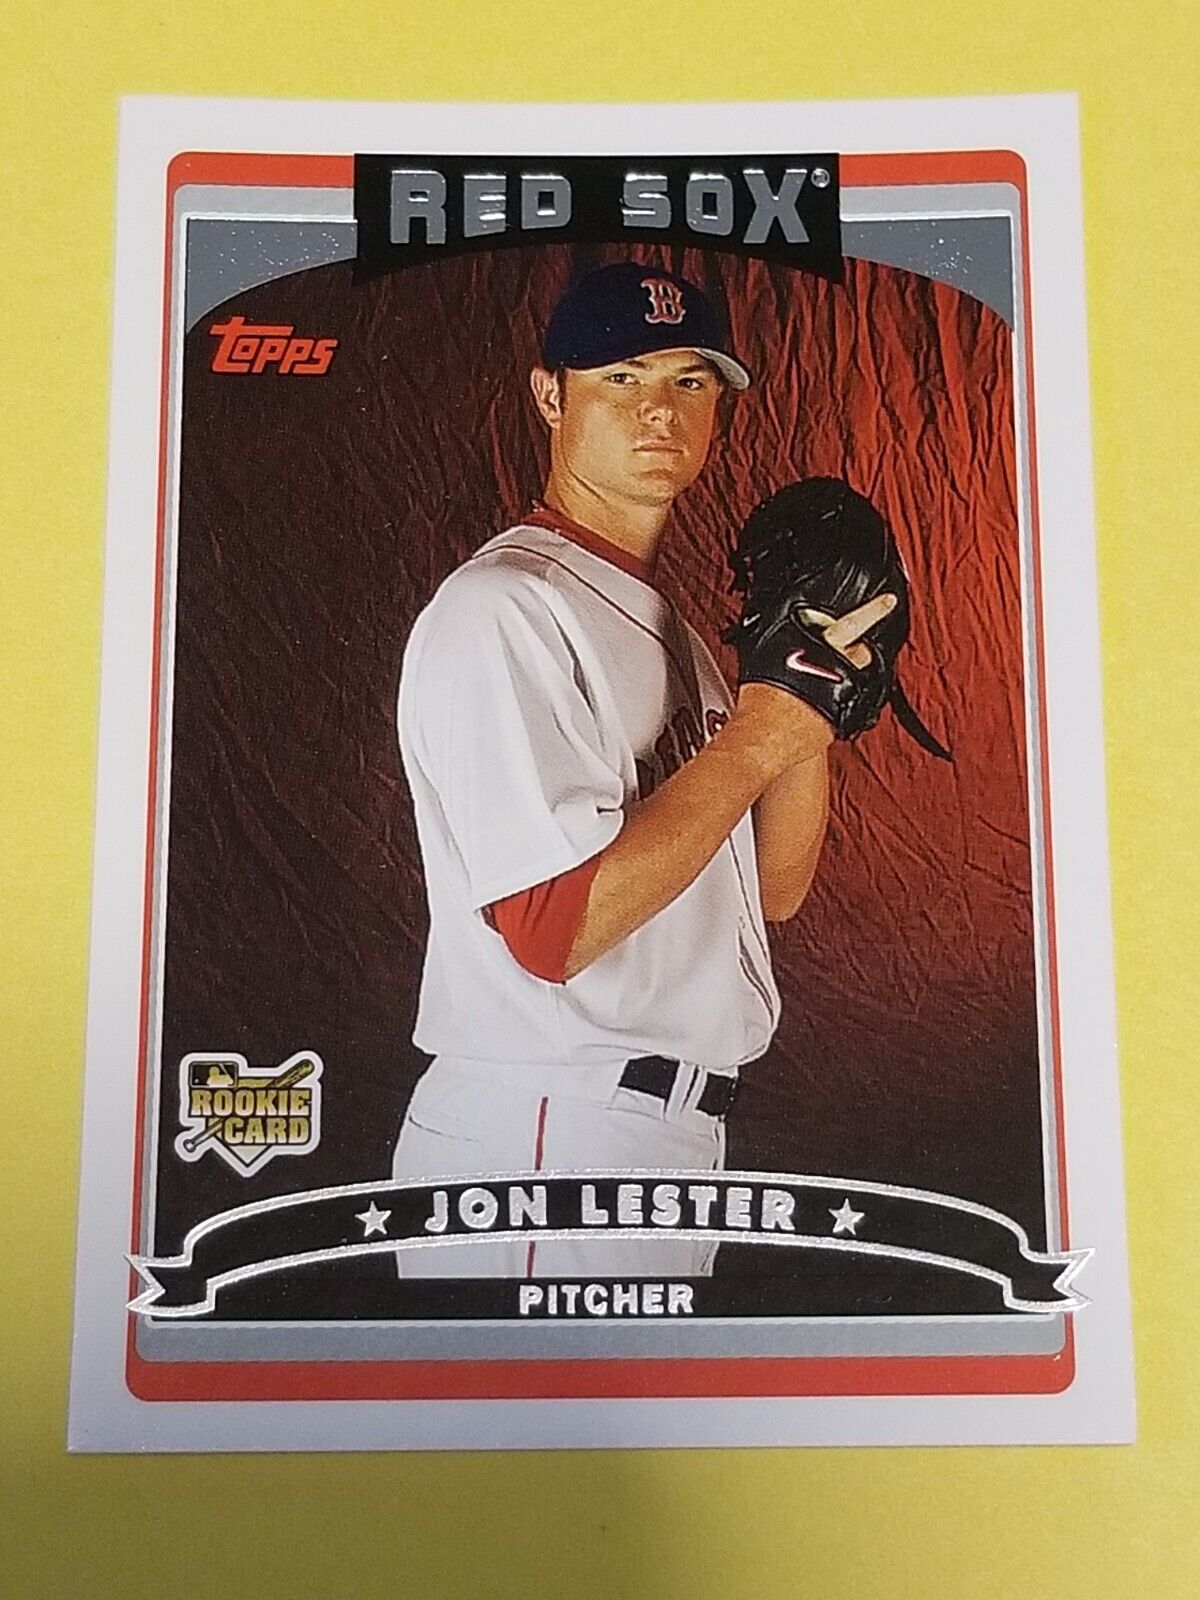 2006 Topps Update Jon Lester Rookie Card RC UH149 Boston Red Sox, MINT